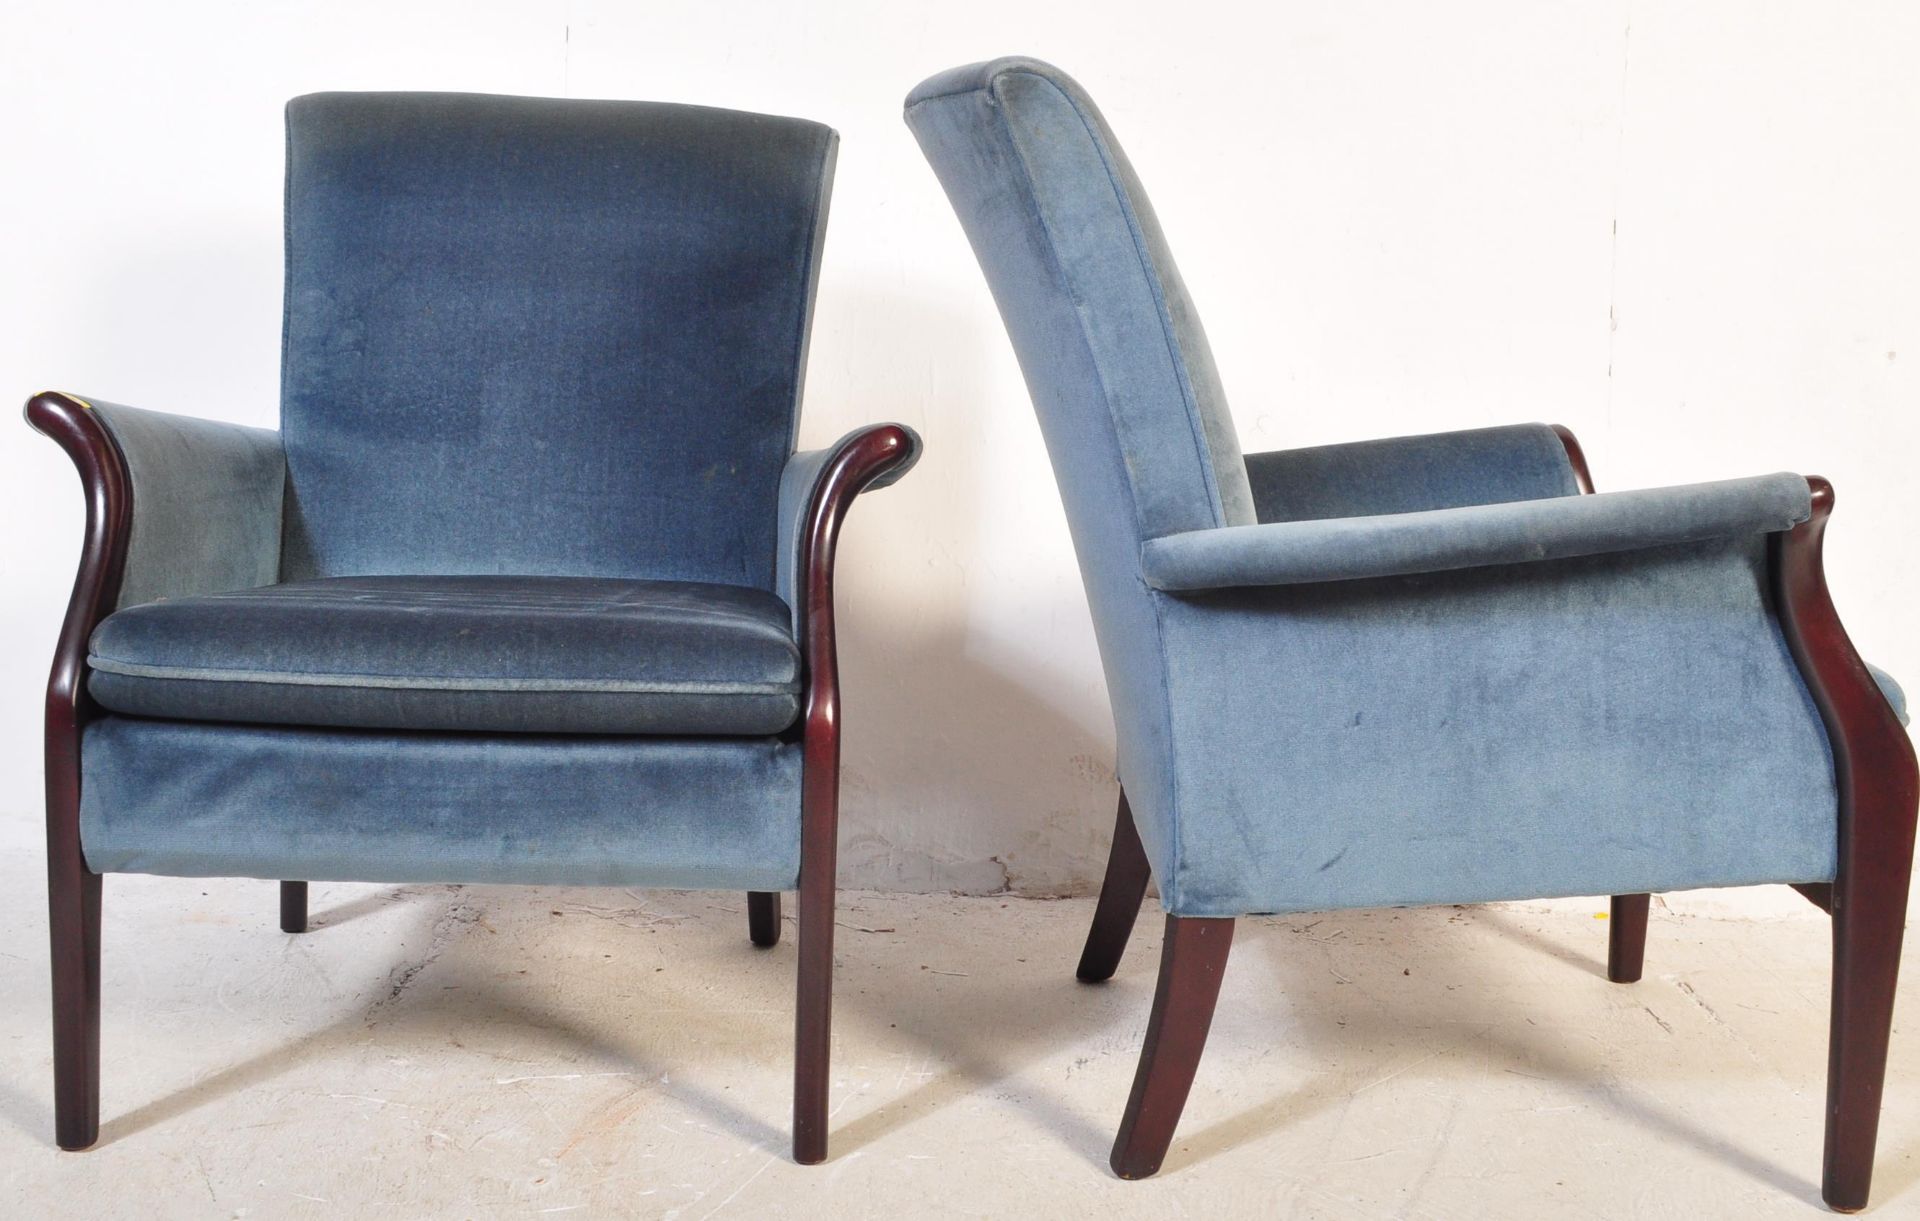 PAIR OF VINTAGE 20TH CENTURY PARKER KNOLL EASY CHAIRS - Image 3 of 6